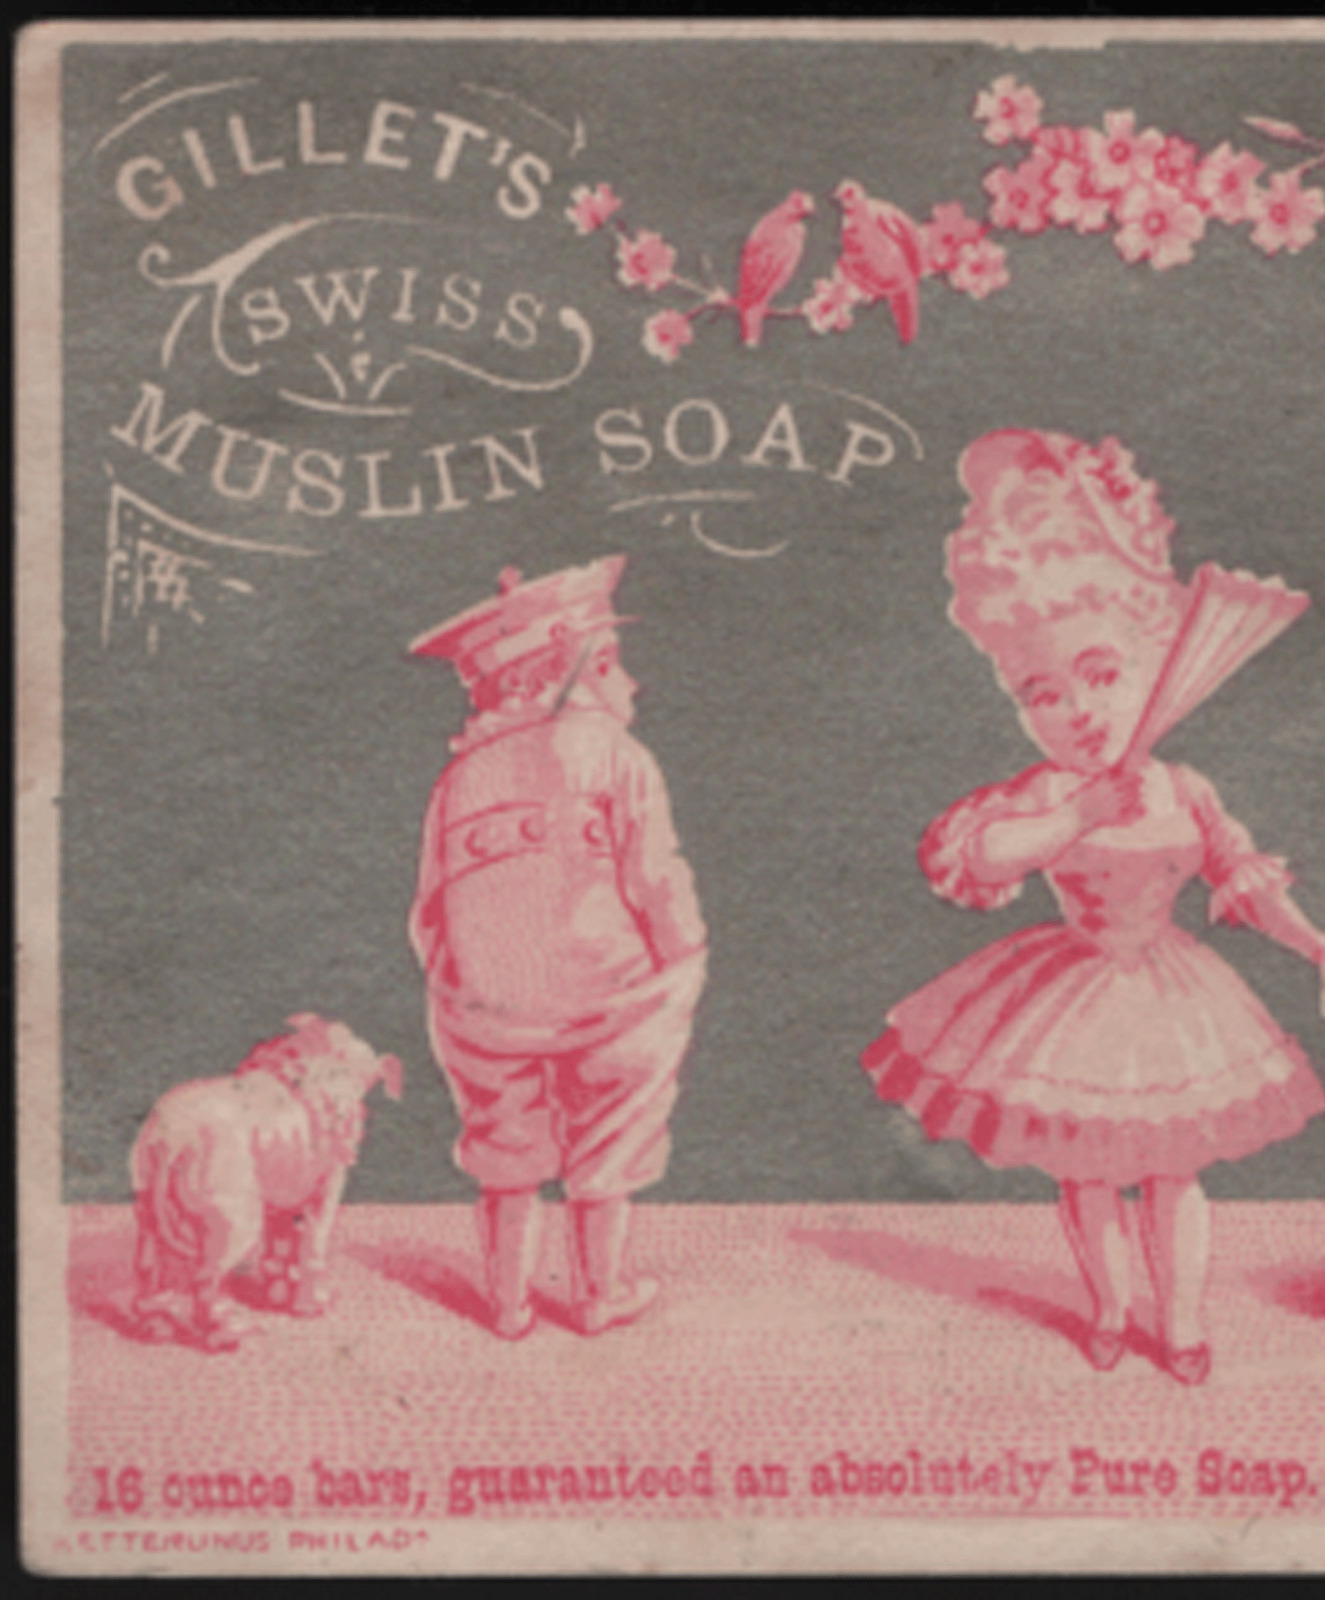 GILLET\'S SWISS MUSLIN SOAP, CHICAGO TRADE CARD,16 OZ. BARS of PUREST SOAP  F908